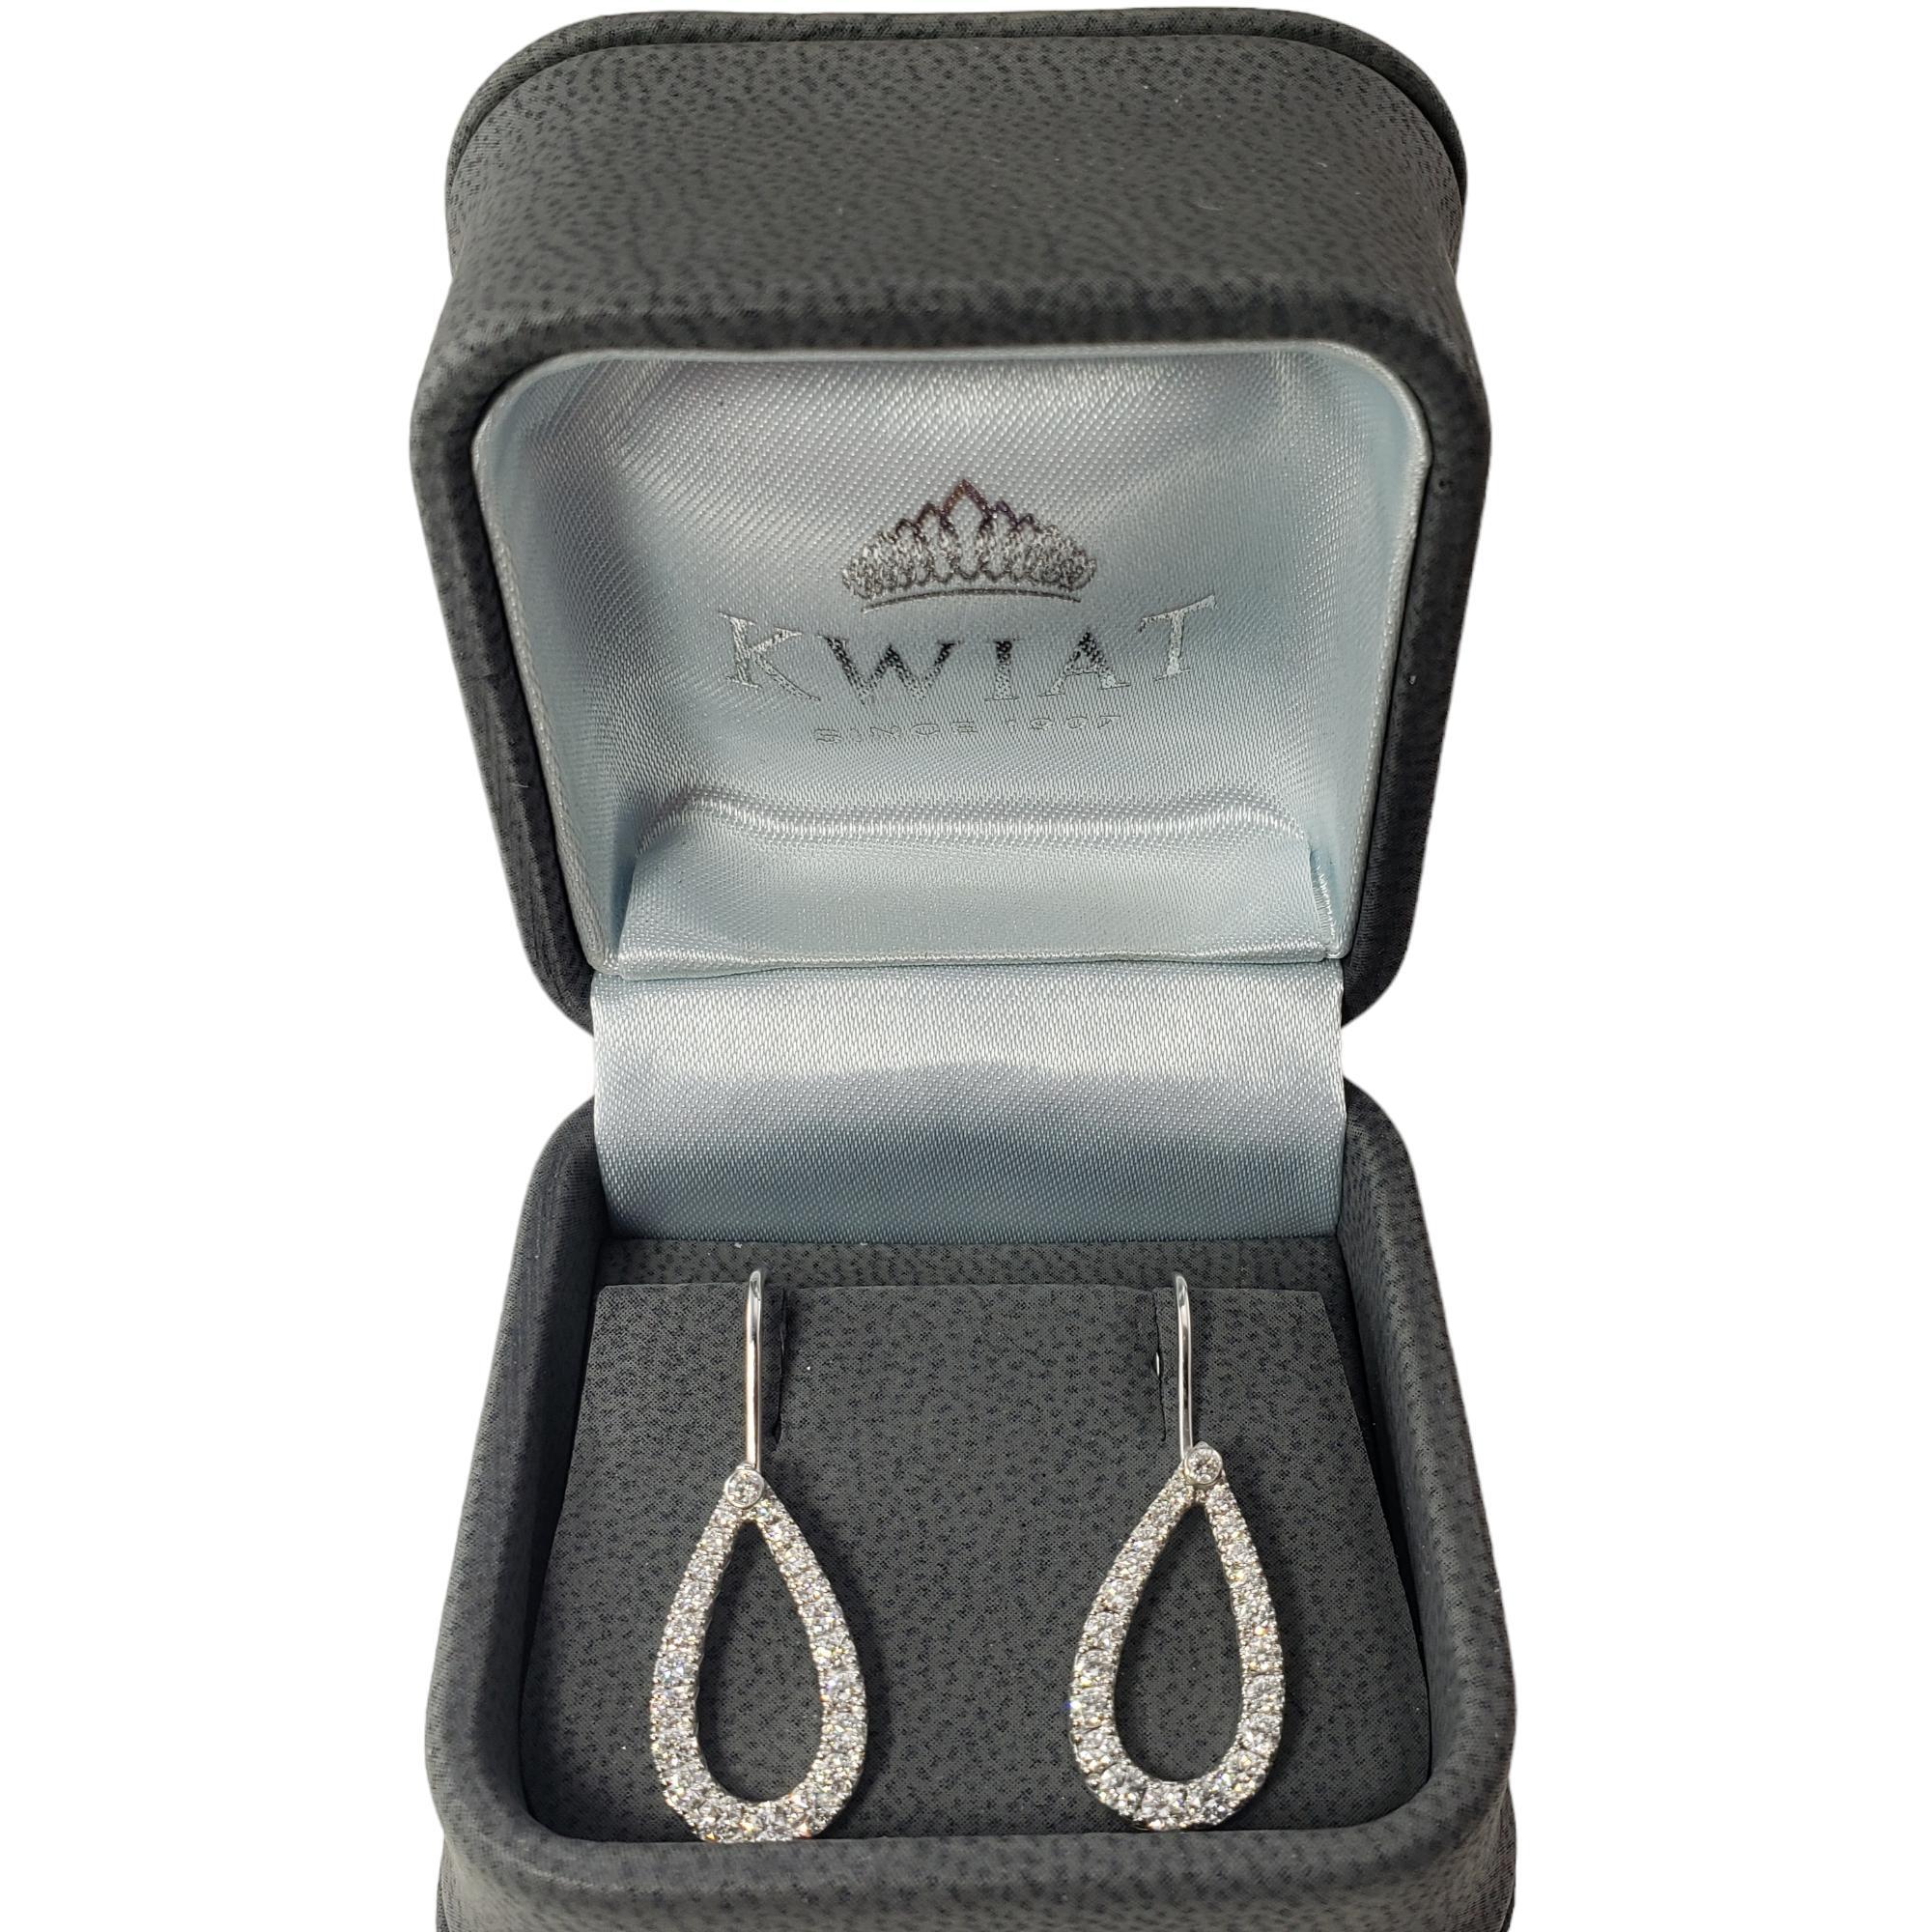 Kwiat 18K White Gold and Diamond Tear Drop Earrings-

These sparkling drop earrings by Kwiat each feature 22 round brilliant cut diamonds set in a lovely teardrop design.

Approximate total diamond weight:  1.03 ct.

Diamond color: G-H

Diamond